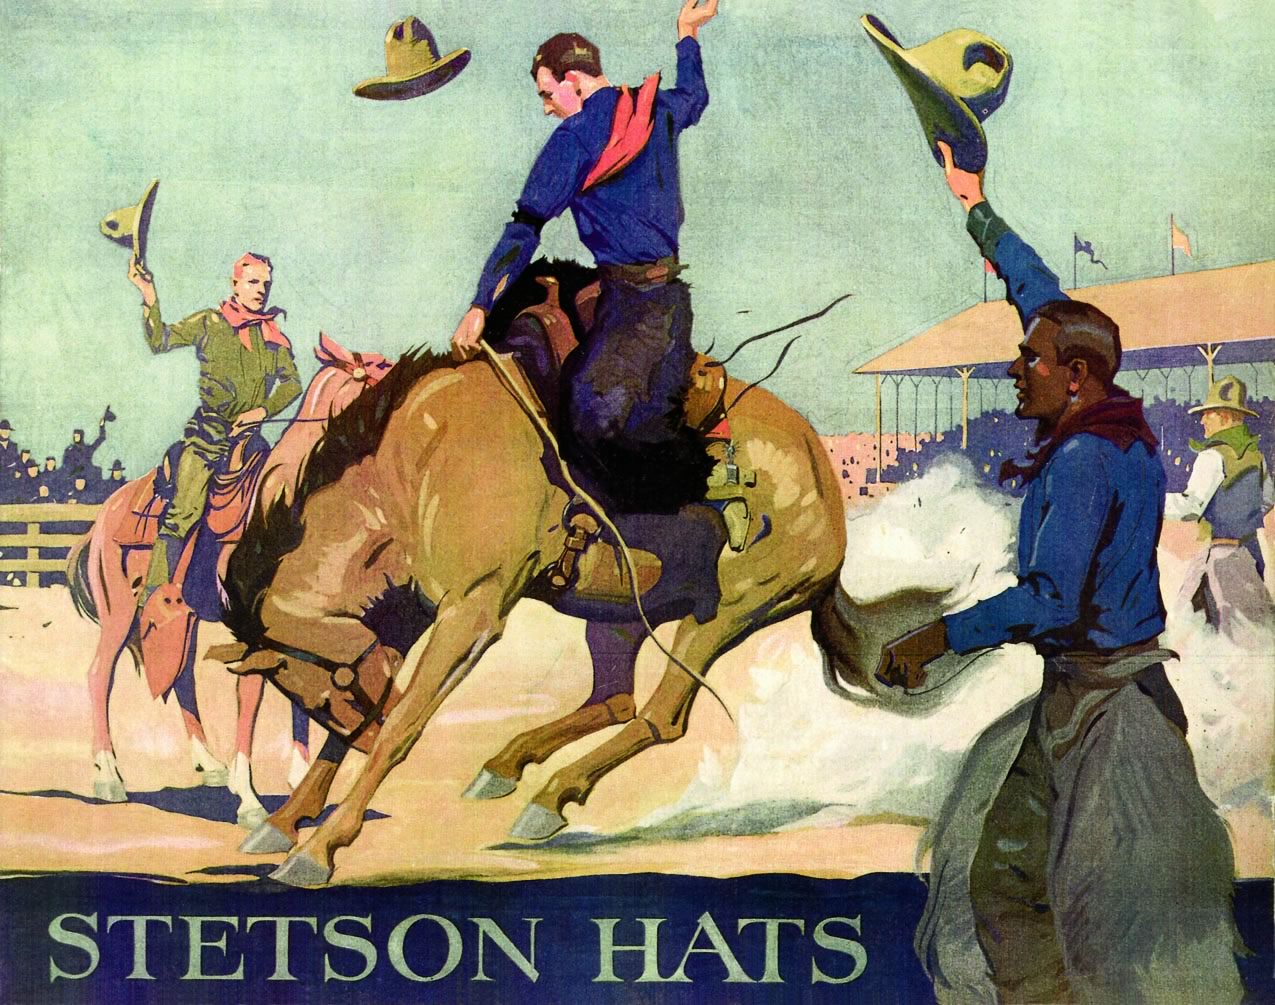 Stetson ad featuring cowboys